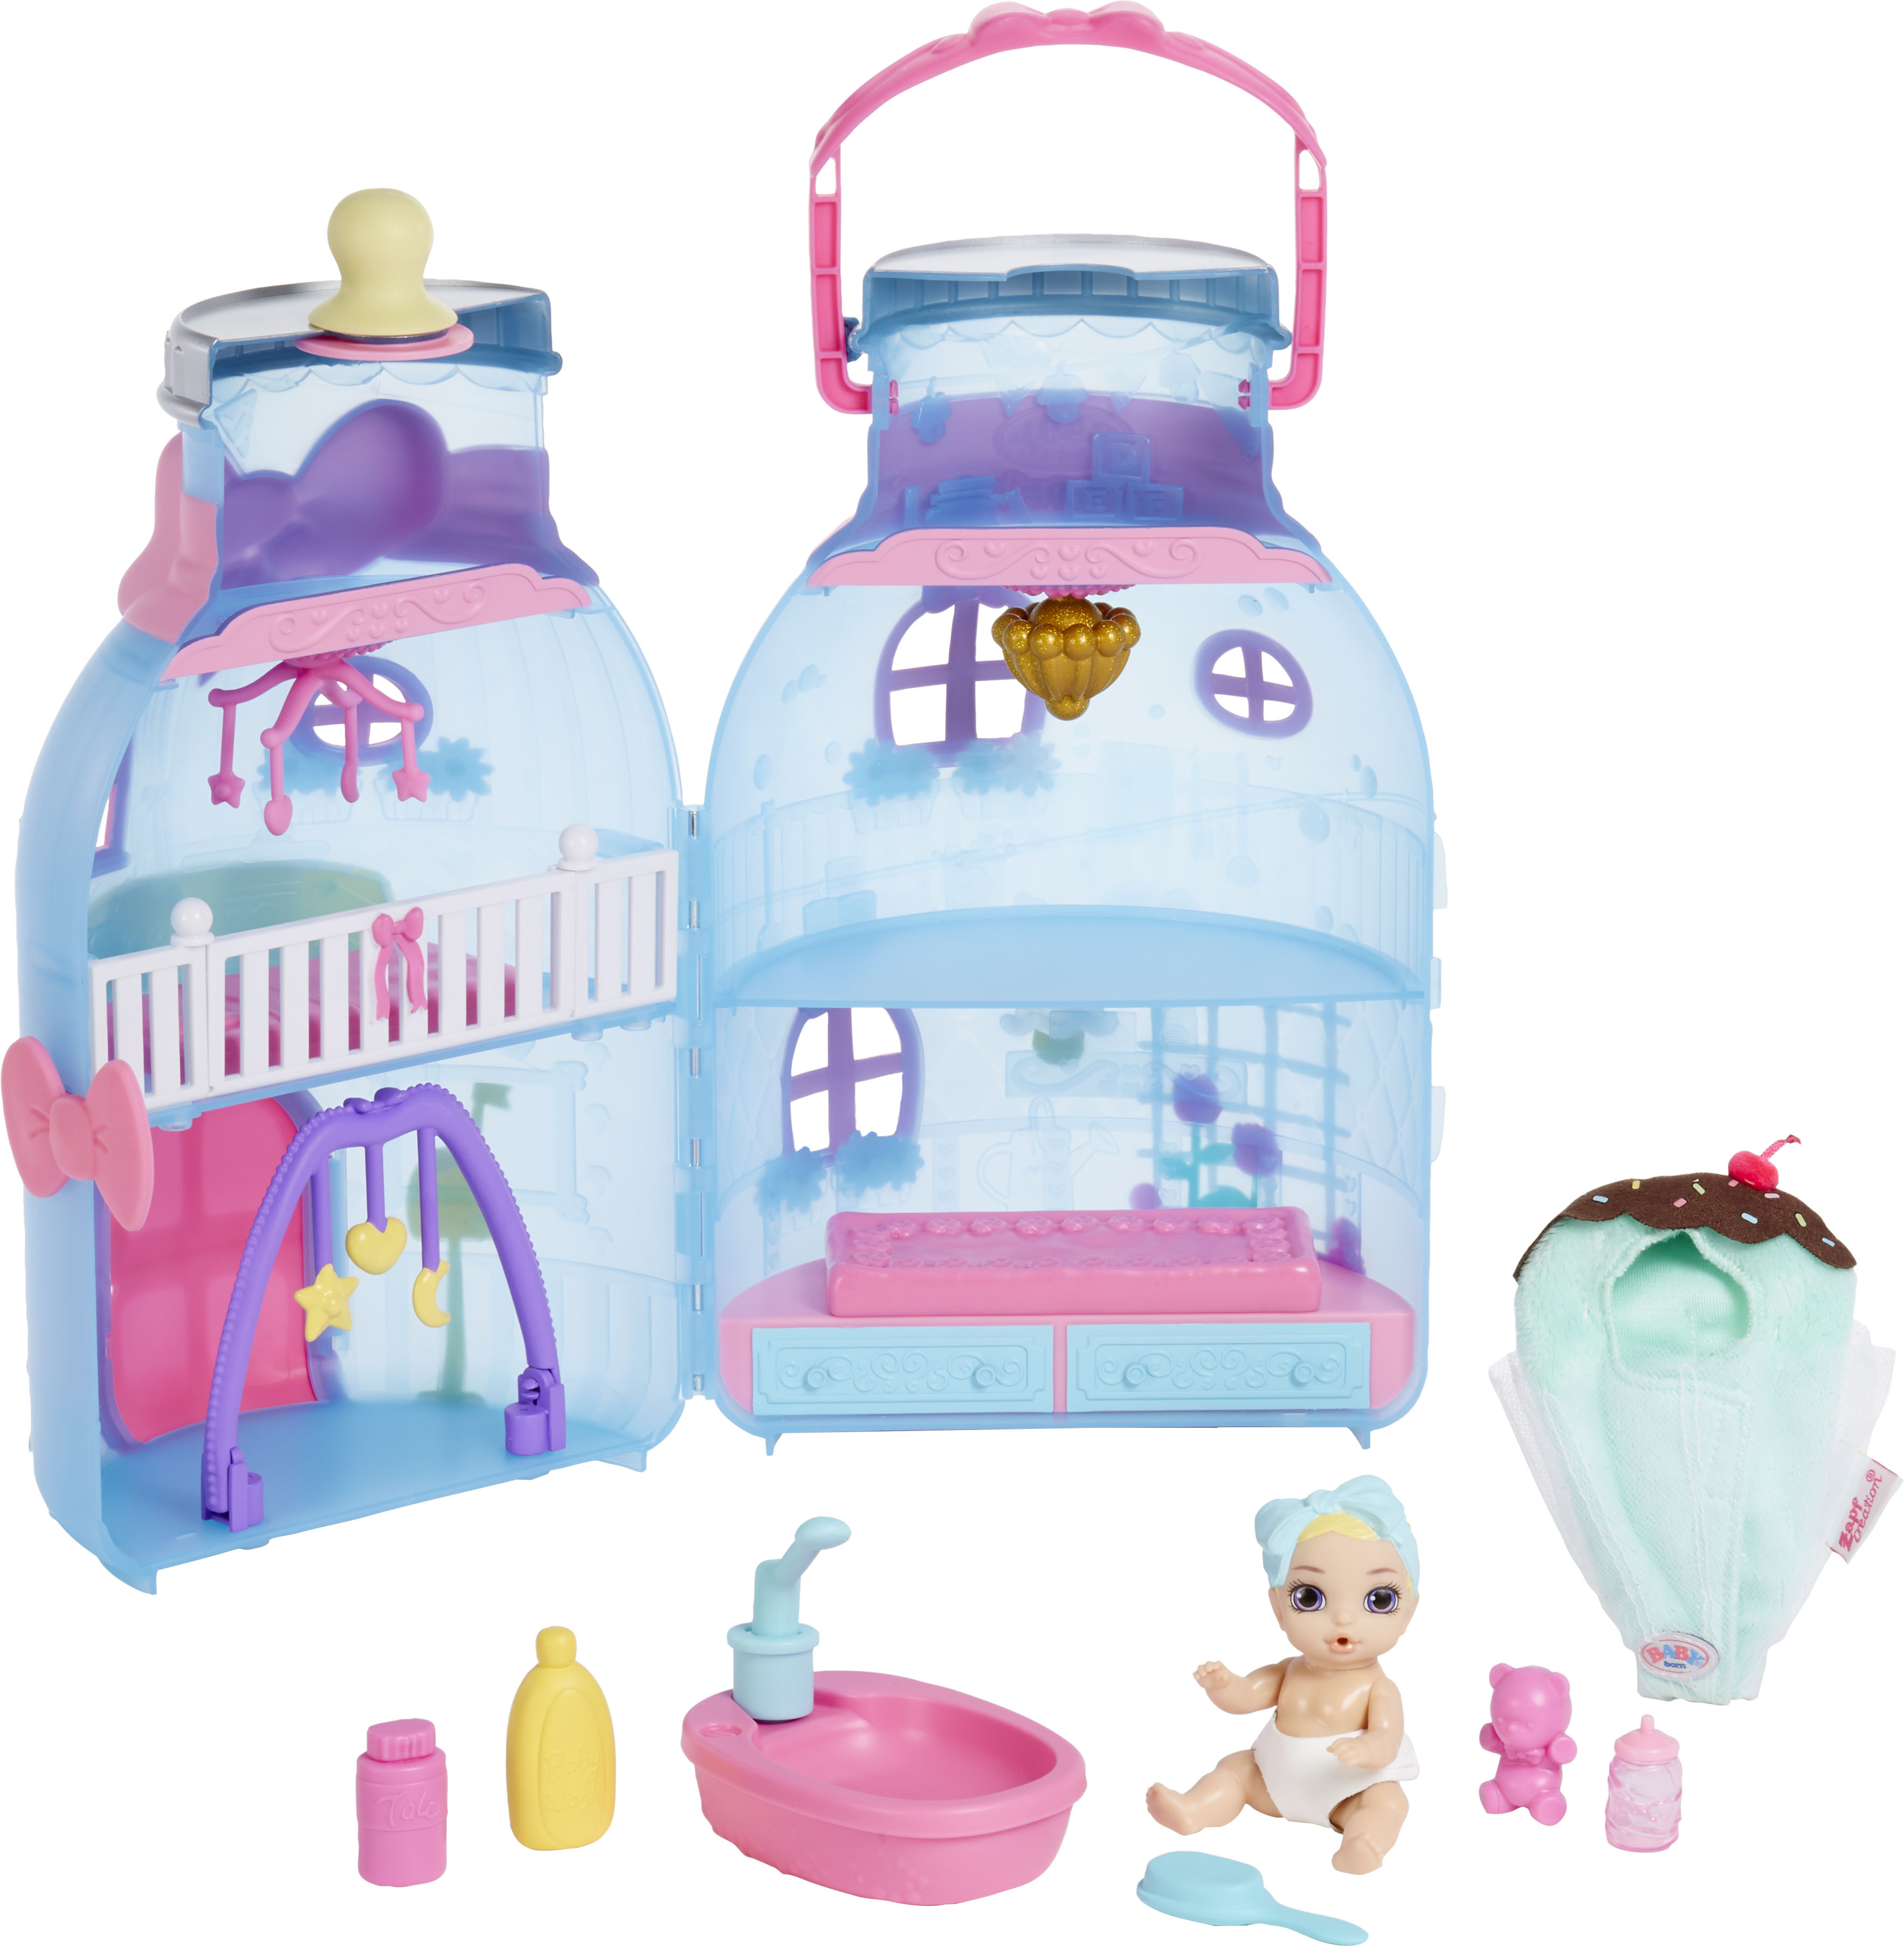 BABY born 917264 Surprise Baby Bottle House for sale online 